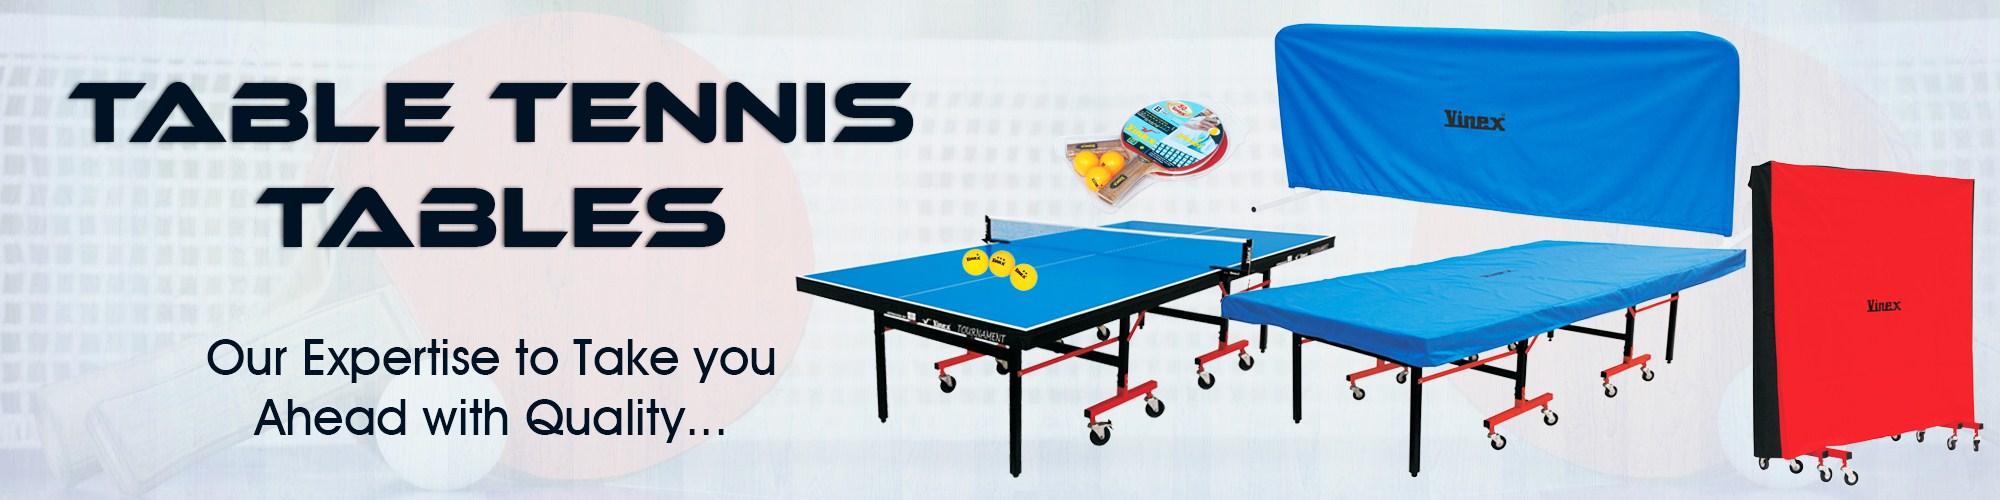 TT Tables and Accessories